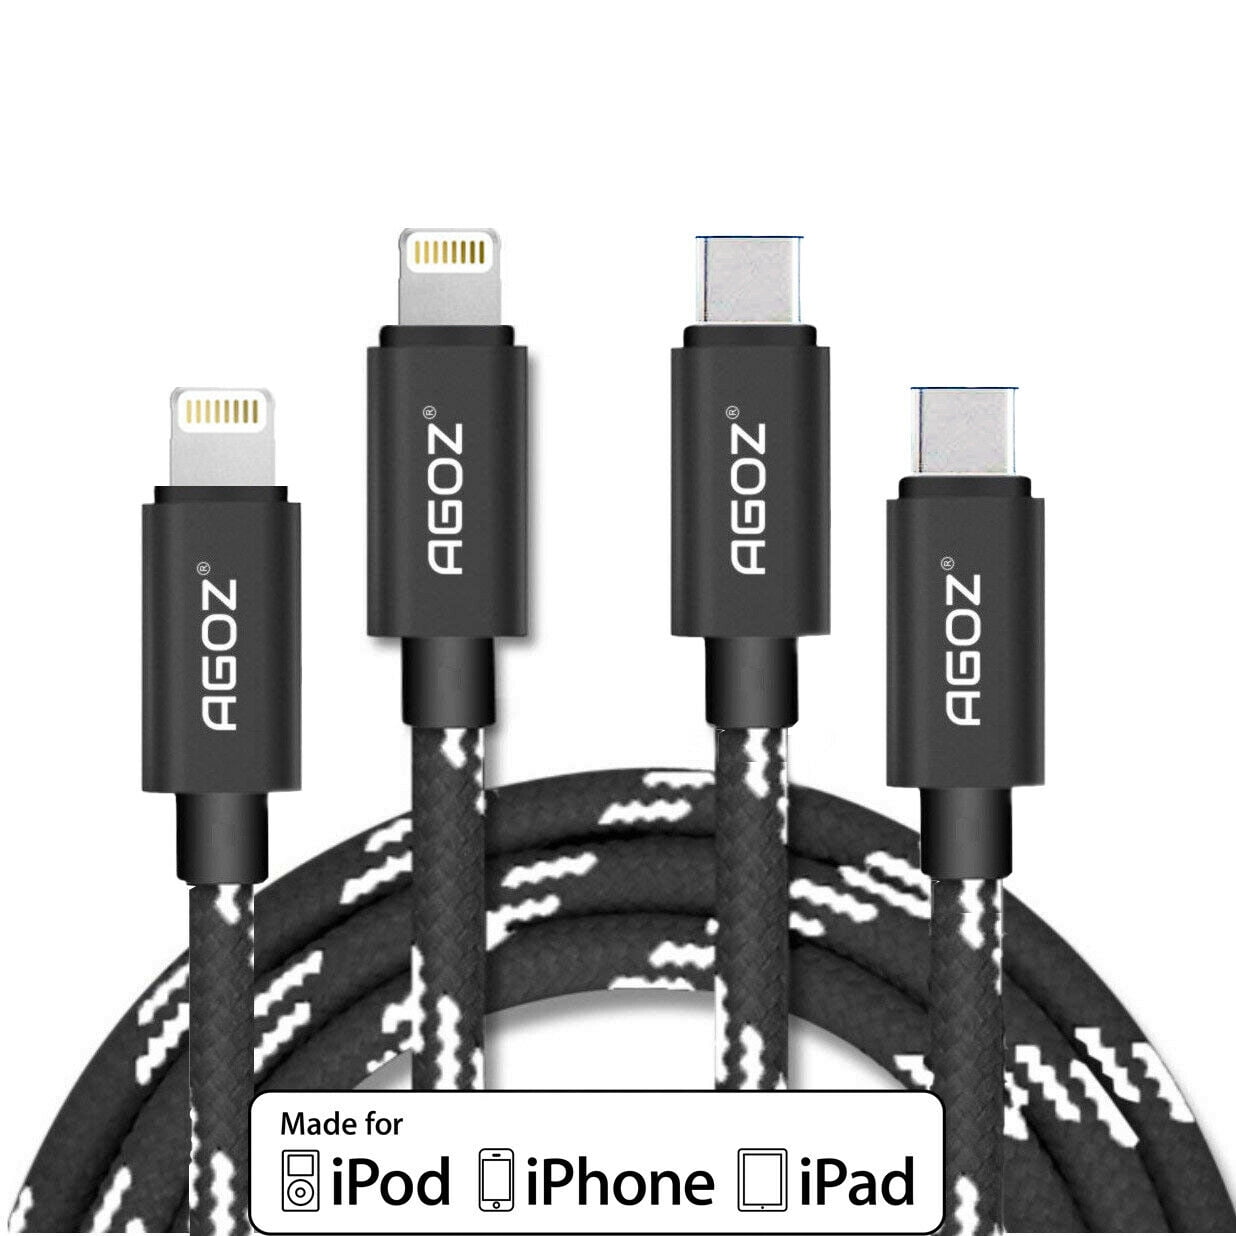 2Pack 10ft iPhone Charger Cable, Apple MFi Certified Long Lightning Cable 10 Foot High Fast 10 Feet Apple iPhone Charging Cable Cord for Apple iPhone 13/12/11 Pro/11/XS MAX/XR/8/7/6s/6/5S/SE iPad 